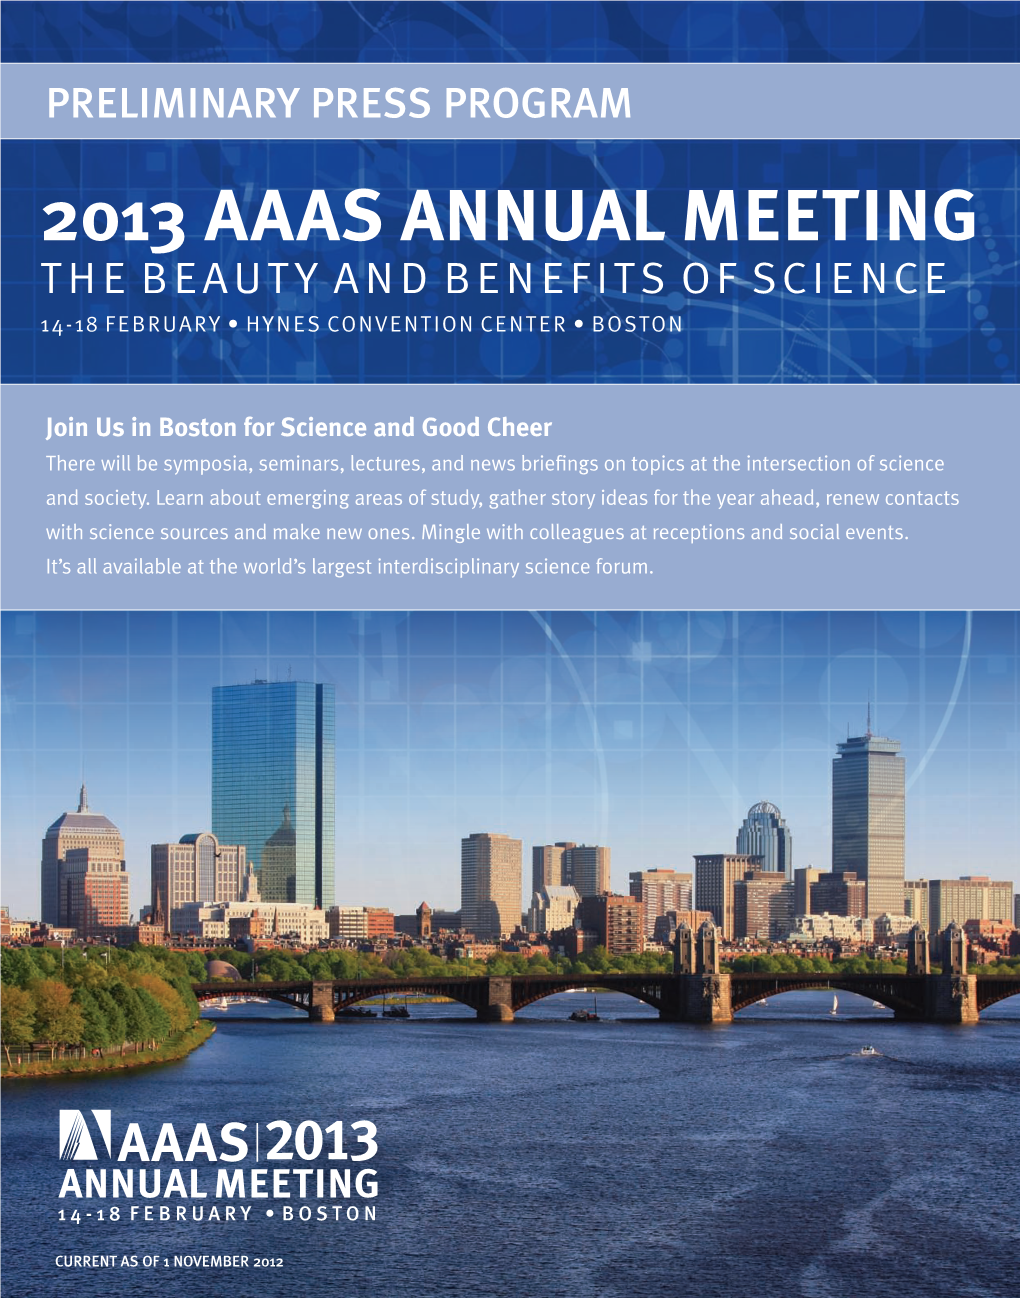 2013 Aaas Annual Meeting the Beauty and Benefits of Science 14-18 February • Hynes Convention Center • Boston